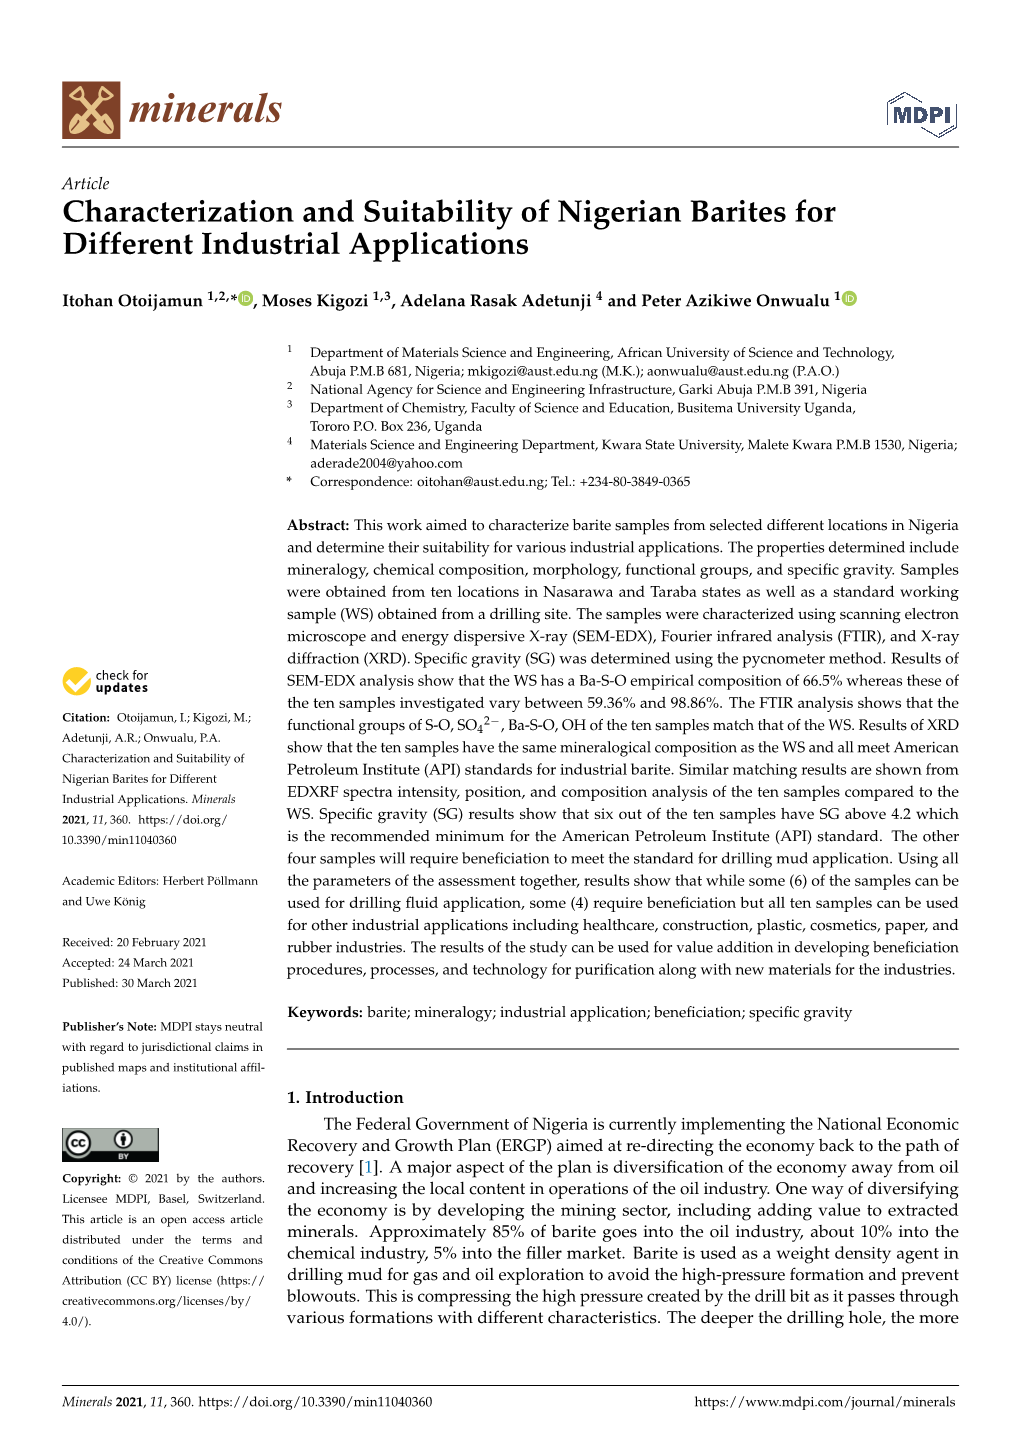 Characterization and Suitability of Nigerian Barites for Different Industrial Applications